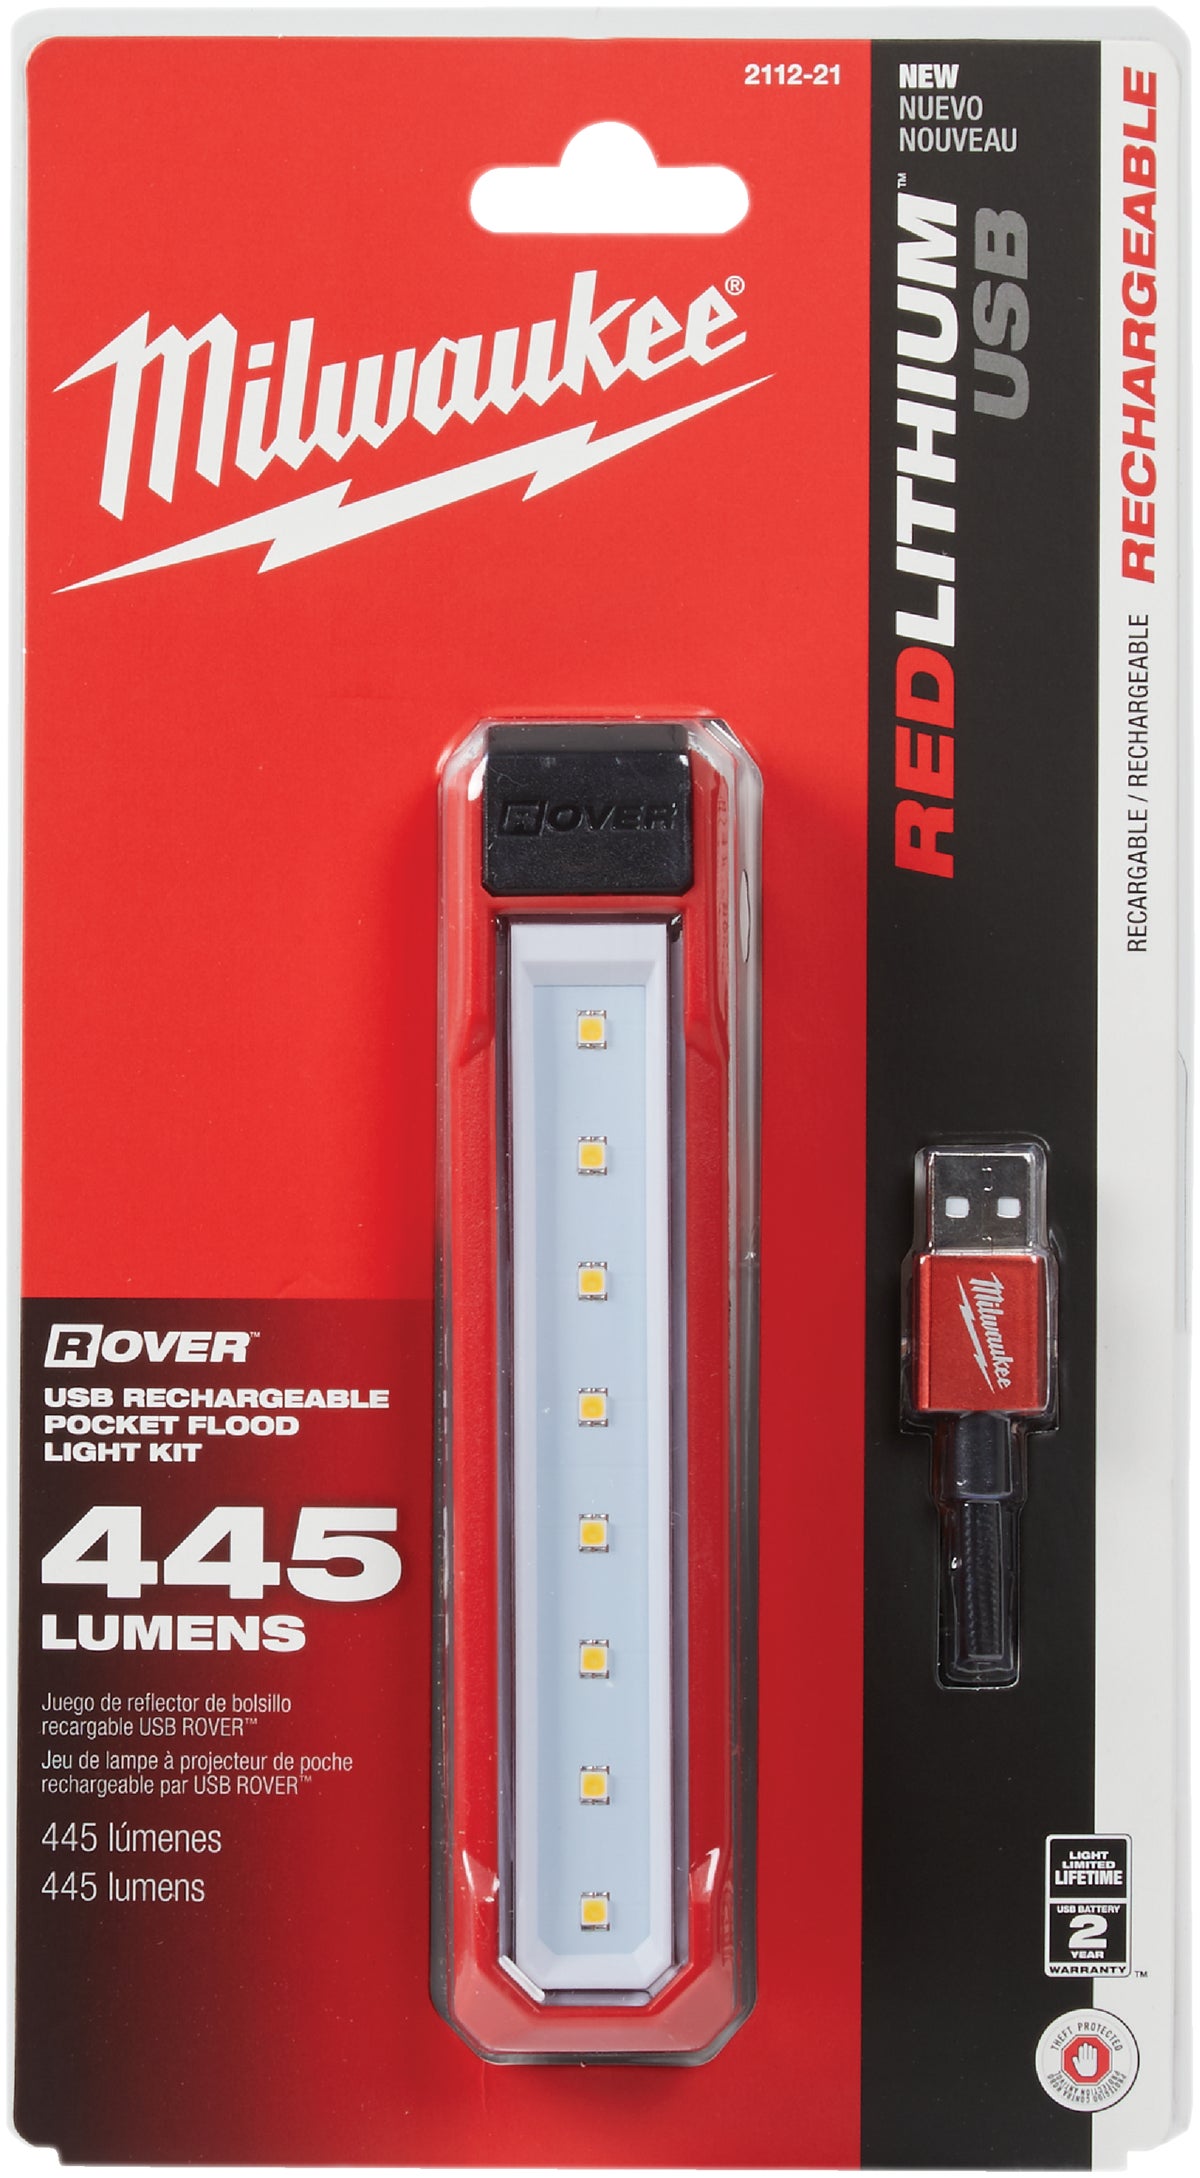 2112-21 Milwaukee Rechargeable LED Work Light 